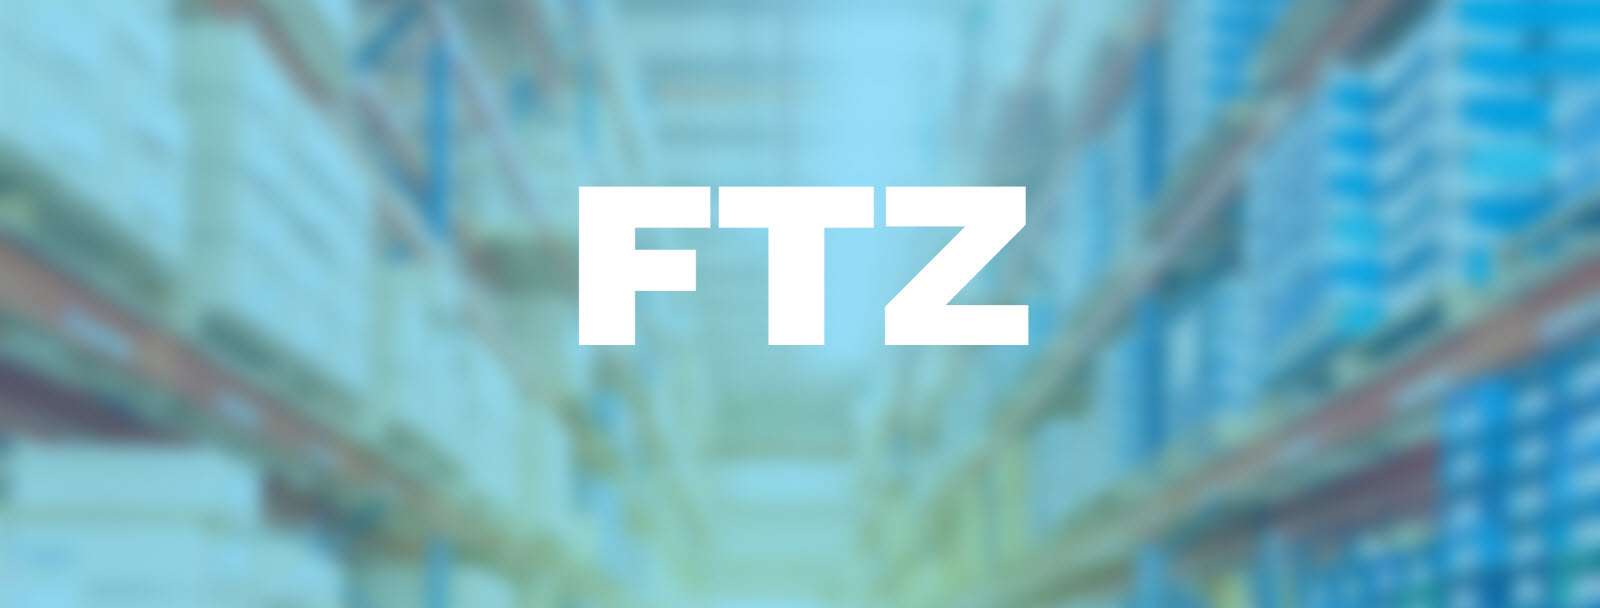 FTZ bonded warehouse in China.